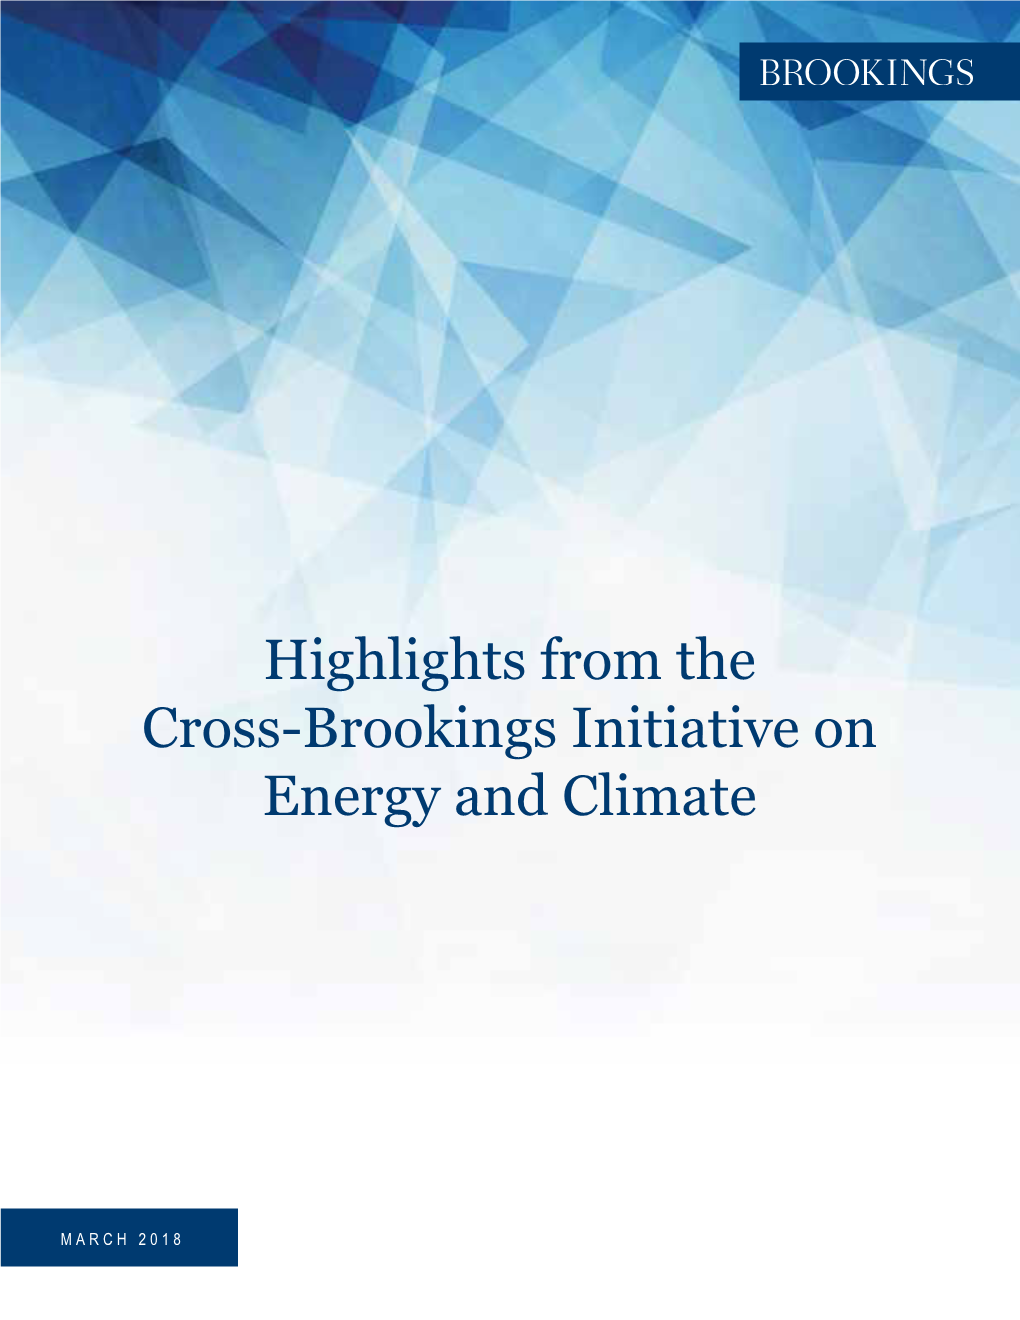 Highlights from the Cross-Brookings Initiative on Energy and Climate